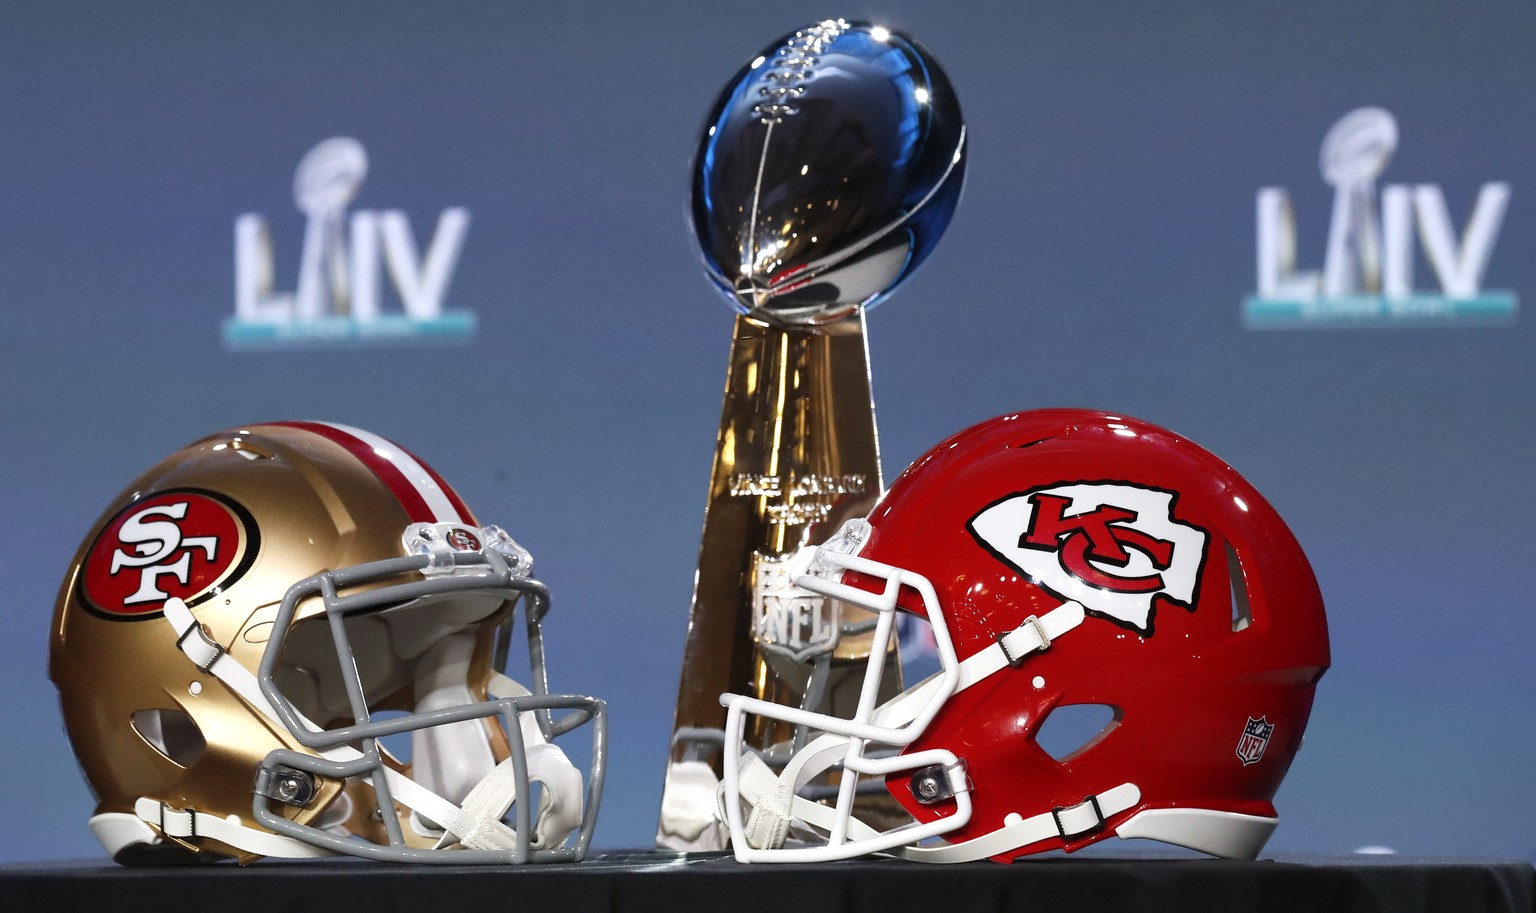 epa08176223 The NFL Super Bowl Vince Lombardi trophy on display with the NFC Champions San Francisco 49ers helmet and the AFC Champions Kansas City helmet before the NFL Commissioner Roger Goodell pre ...